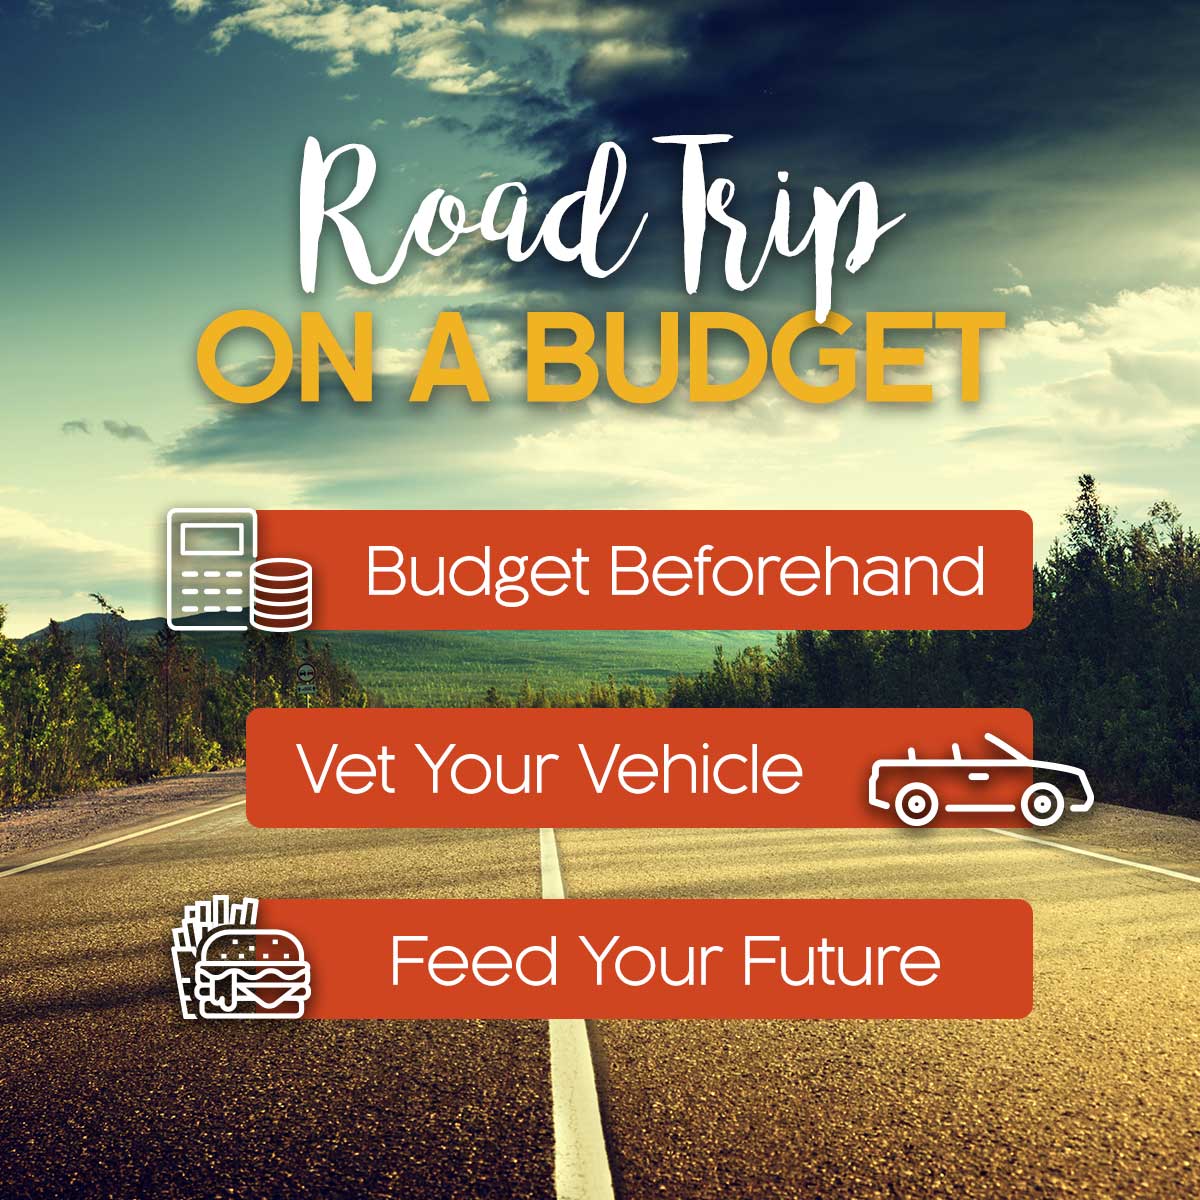 Road Trip on a Budget